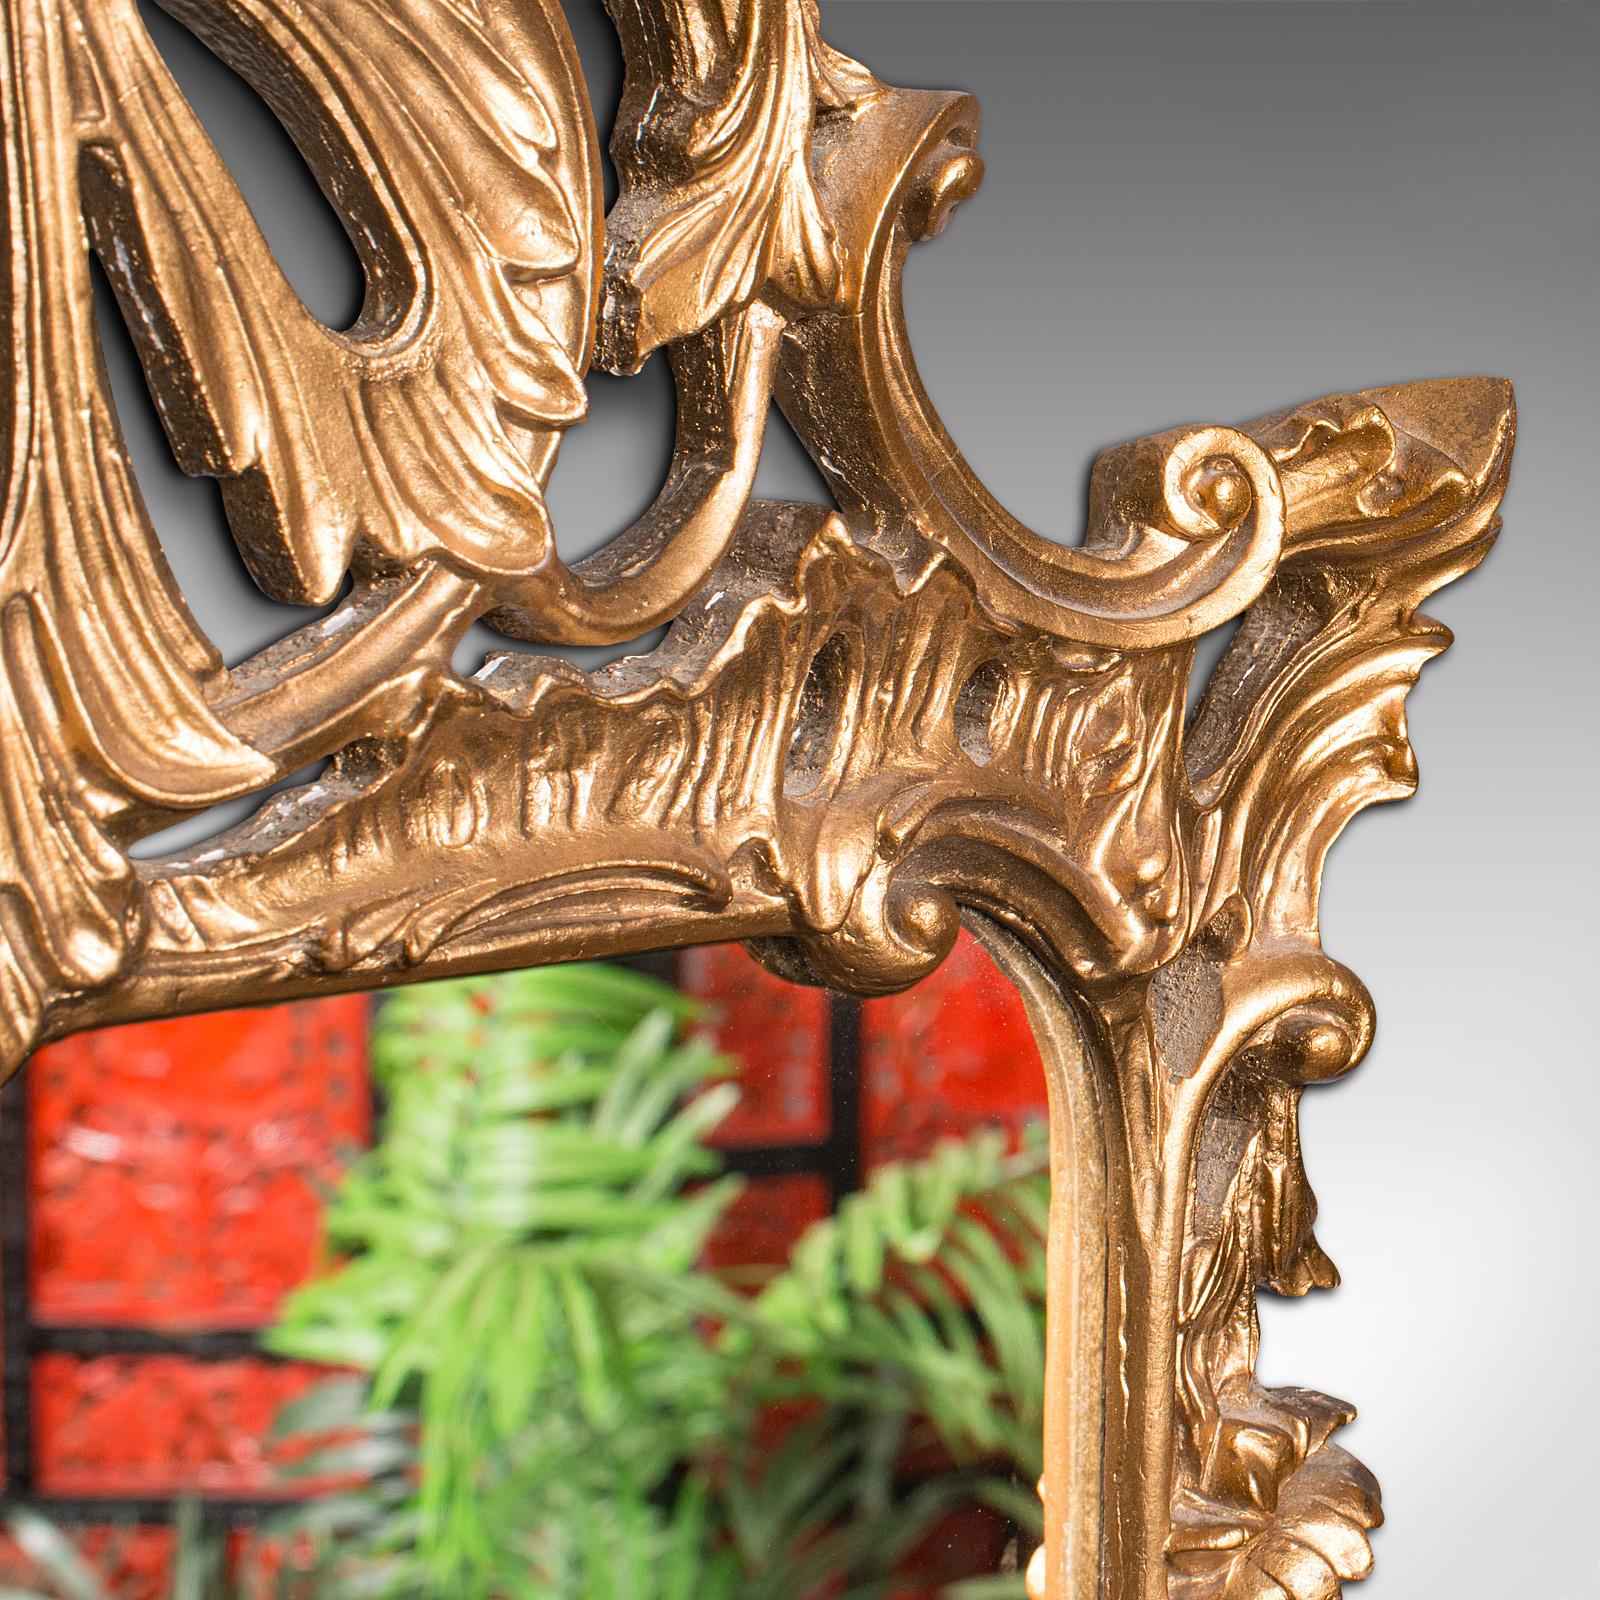 Tall Vintage Wall Mirror English Gilt, Decorative Renaissance Revival circa 1960 In Good Condition For Sale In Hele, Devon, GB